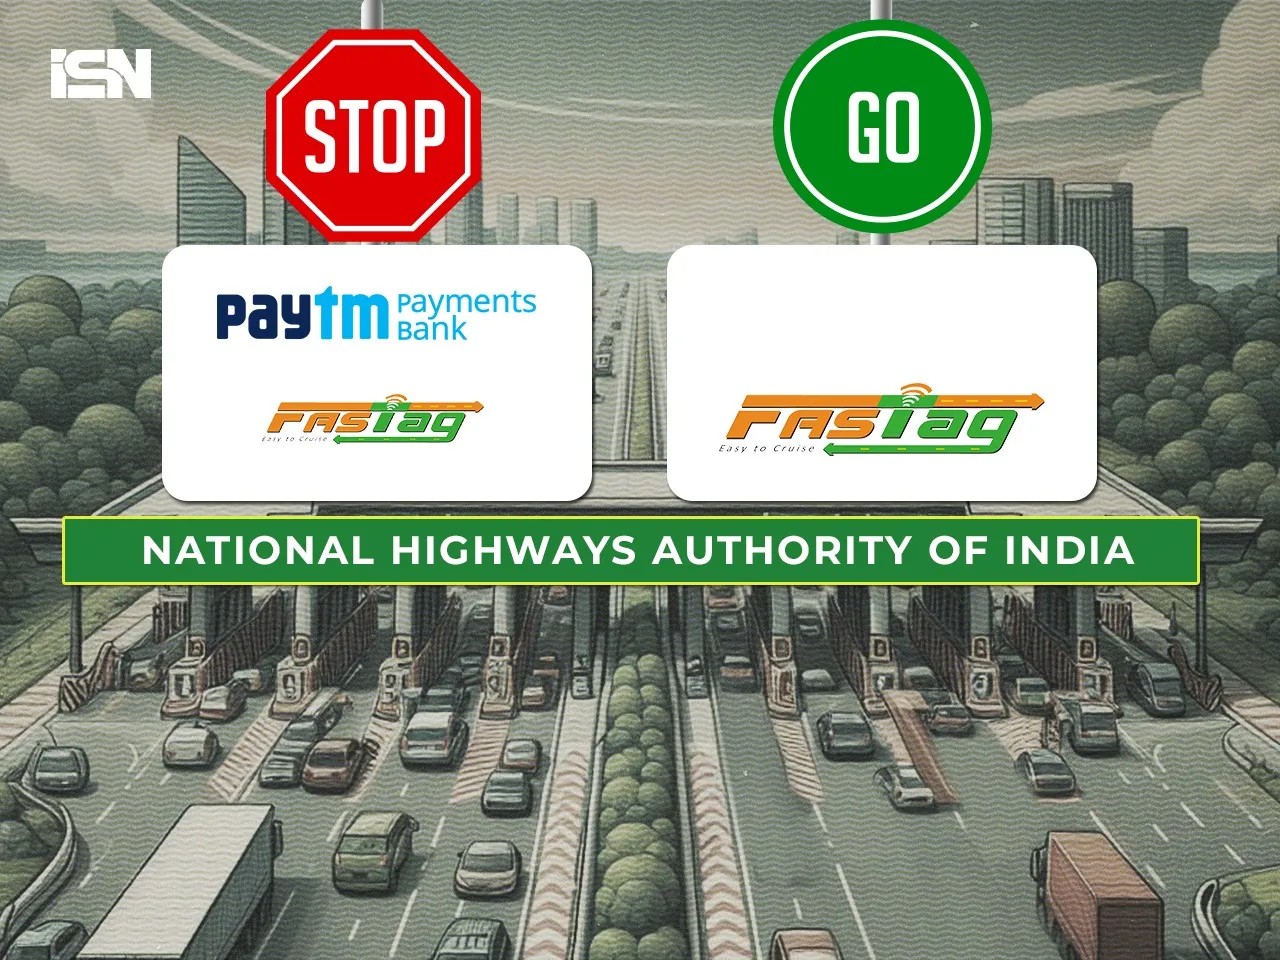 NHAI urges Paytm FASTag users to switch to other bank FASTag